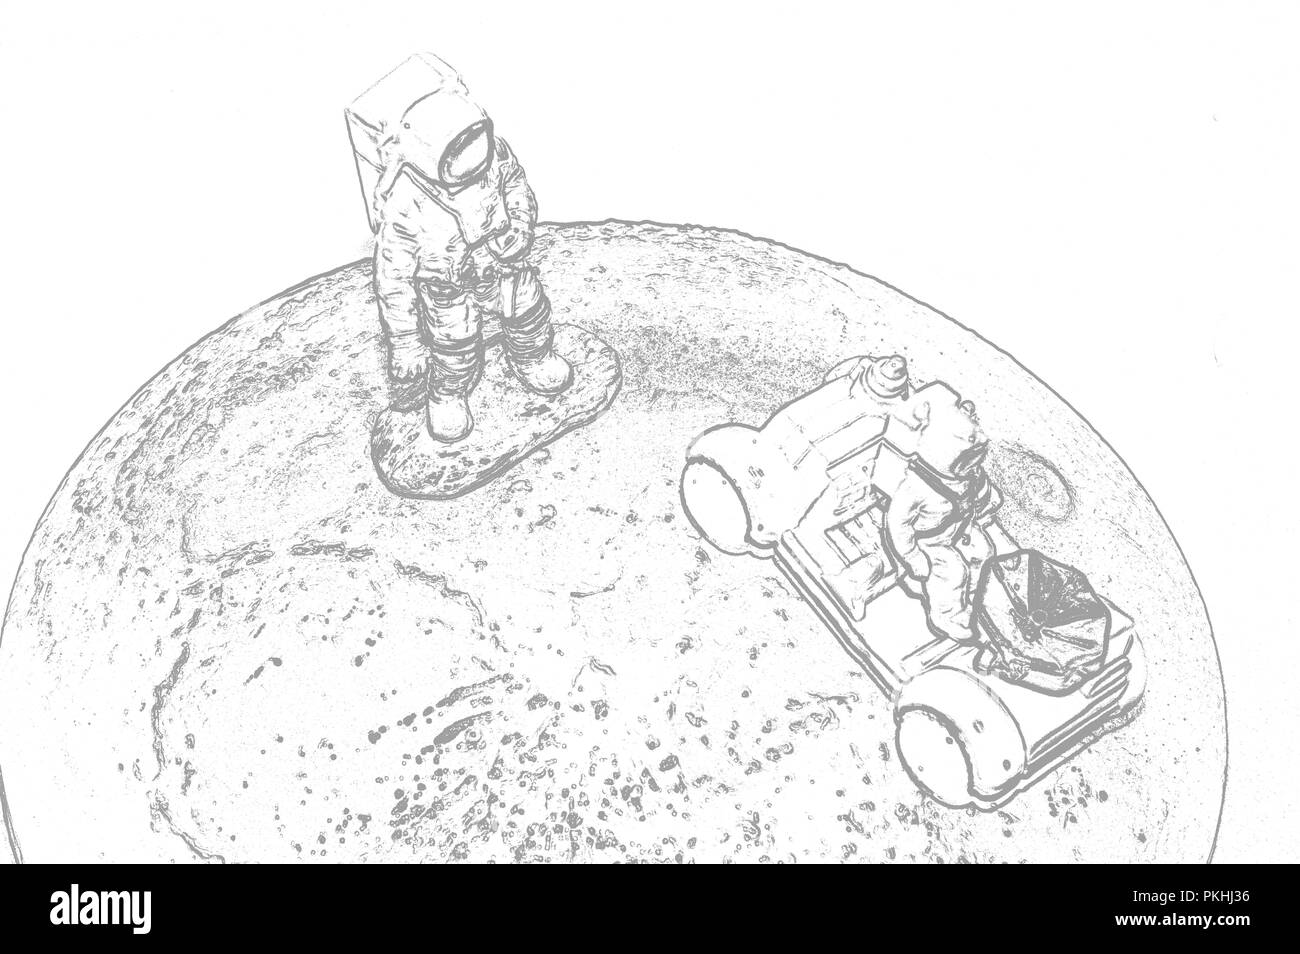 Two astronauts on the moon rover on the moon. Illustration Stock Photo